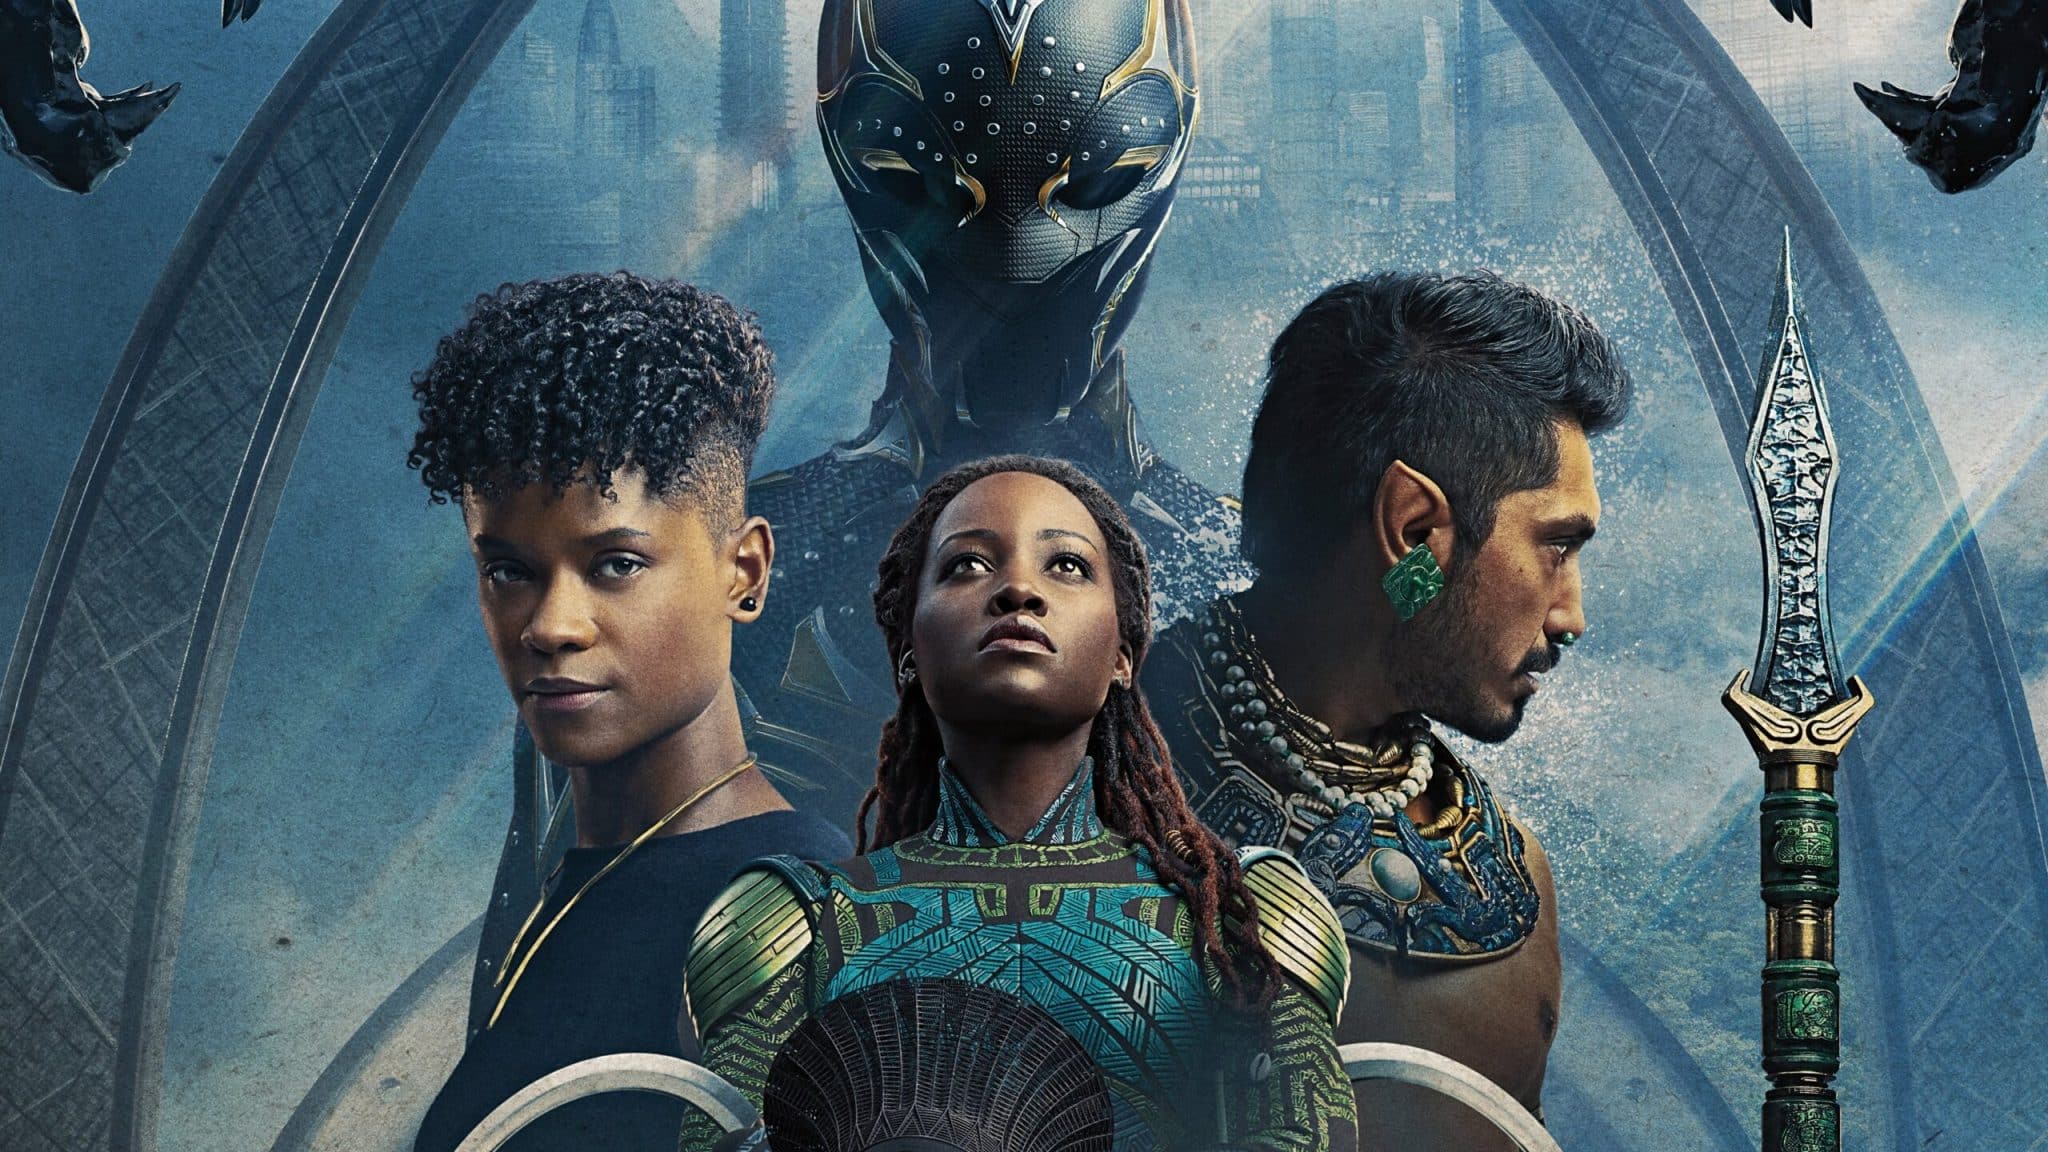 'Black Panther' sequel ignites box office with $330 million global debut